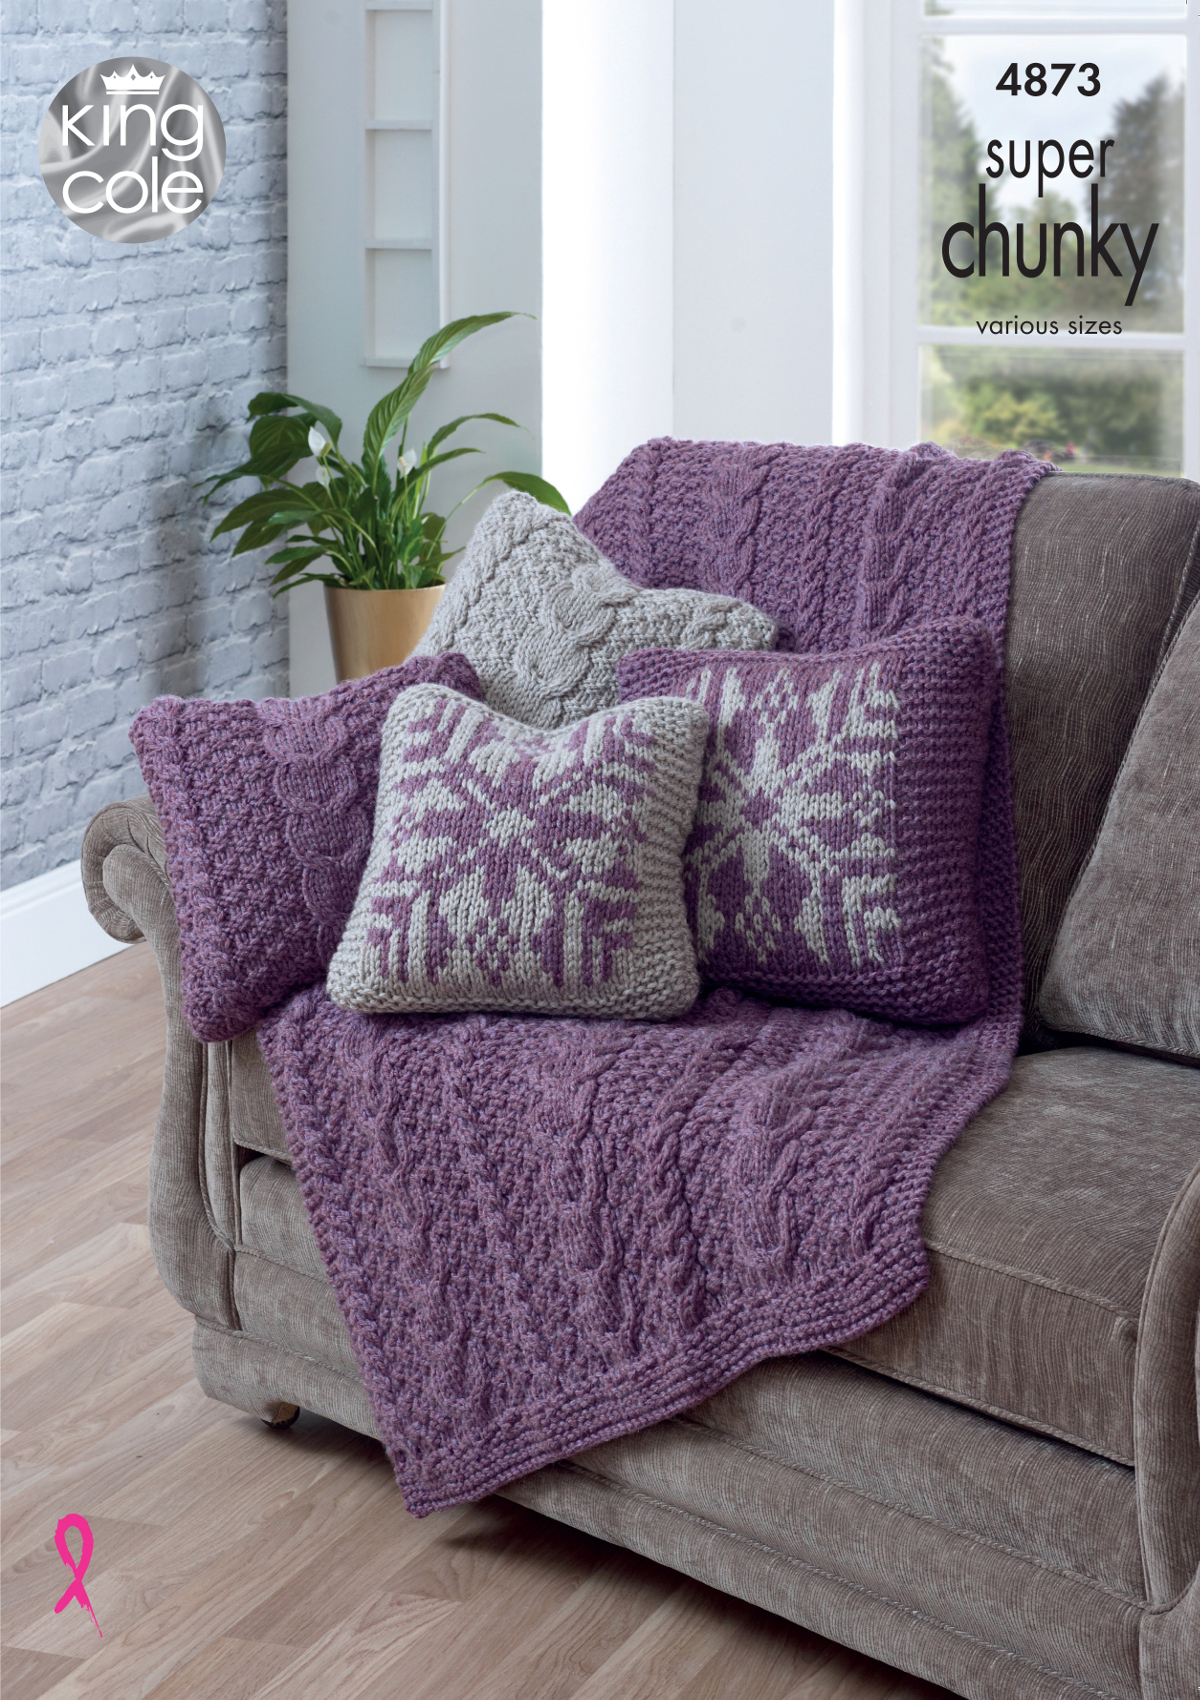 Chunky Wool Throw Knitting Pattern Details About Knitting Pattern For Blanket Throw Cushion Covers King Cole Super Chunky 4873